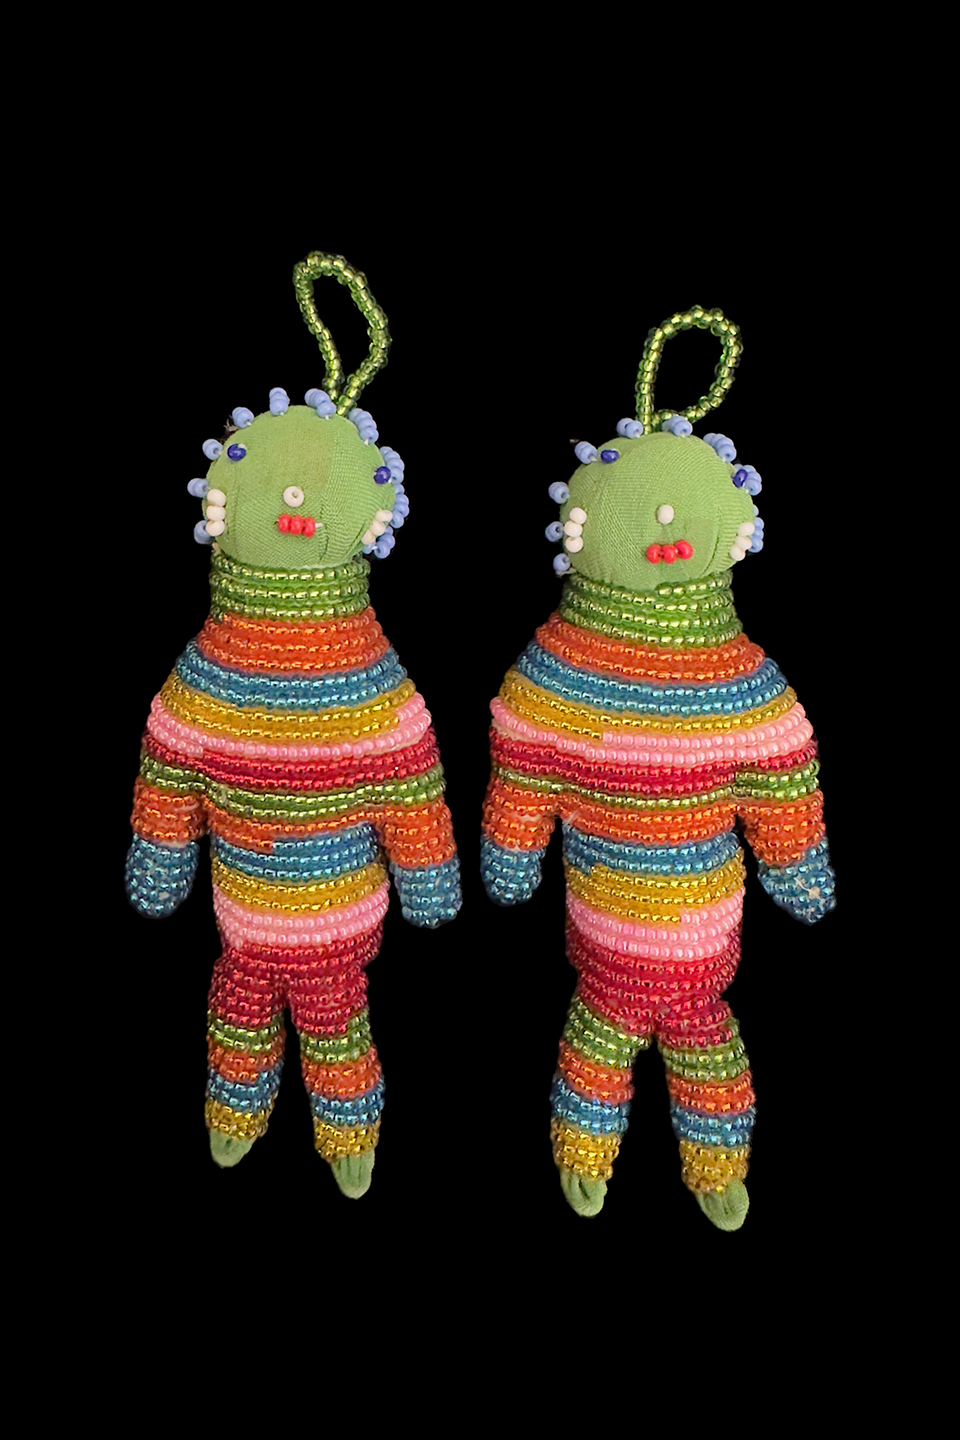 2 x Beaded Figurative Ornaments - South Africa - Sold out